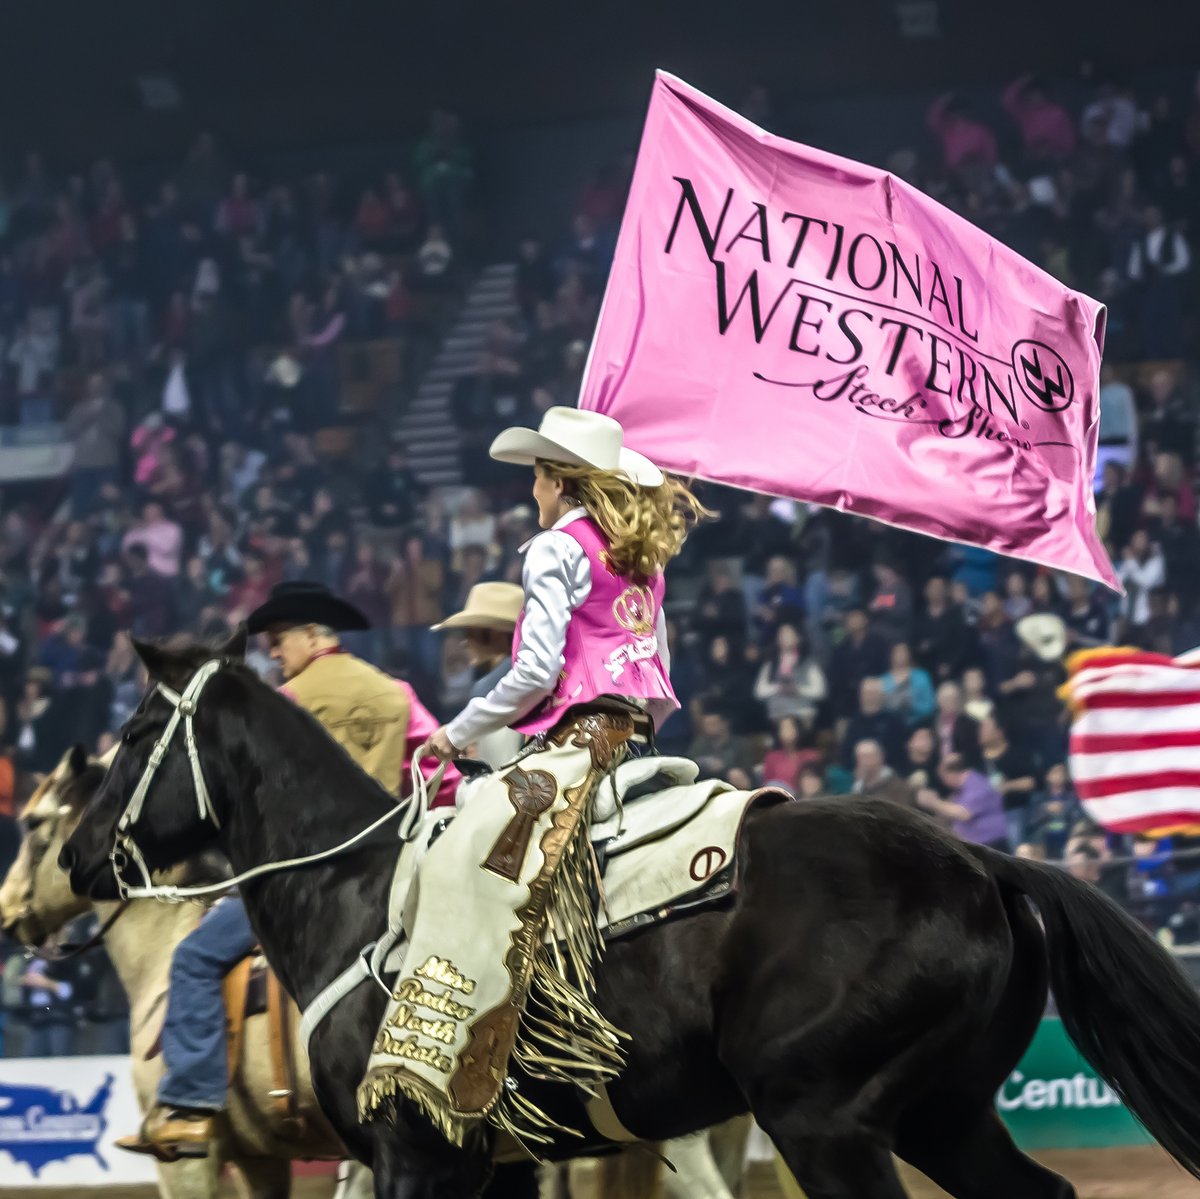 Who wants FREE tickets to tomorrow's Pink Pro Rodeo presented by @Cigna 7pm? The first 4 people who comment on this post with the names of who they'd like to bring will win 4 tickets!

Winners will be notified tonight at 8pm. 🎟️ 

#NWSS2020 #CignaPinkRodeo #CignaMountainStates